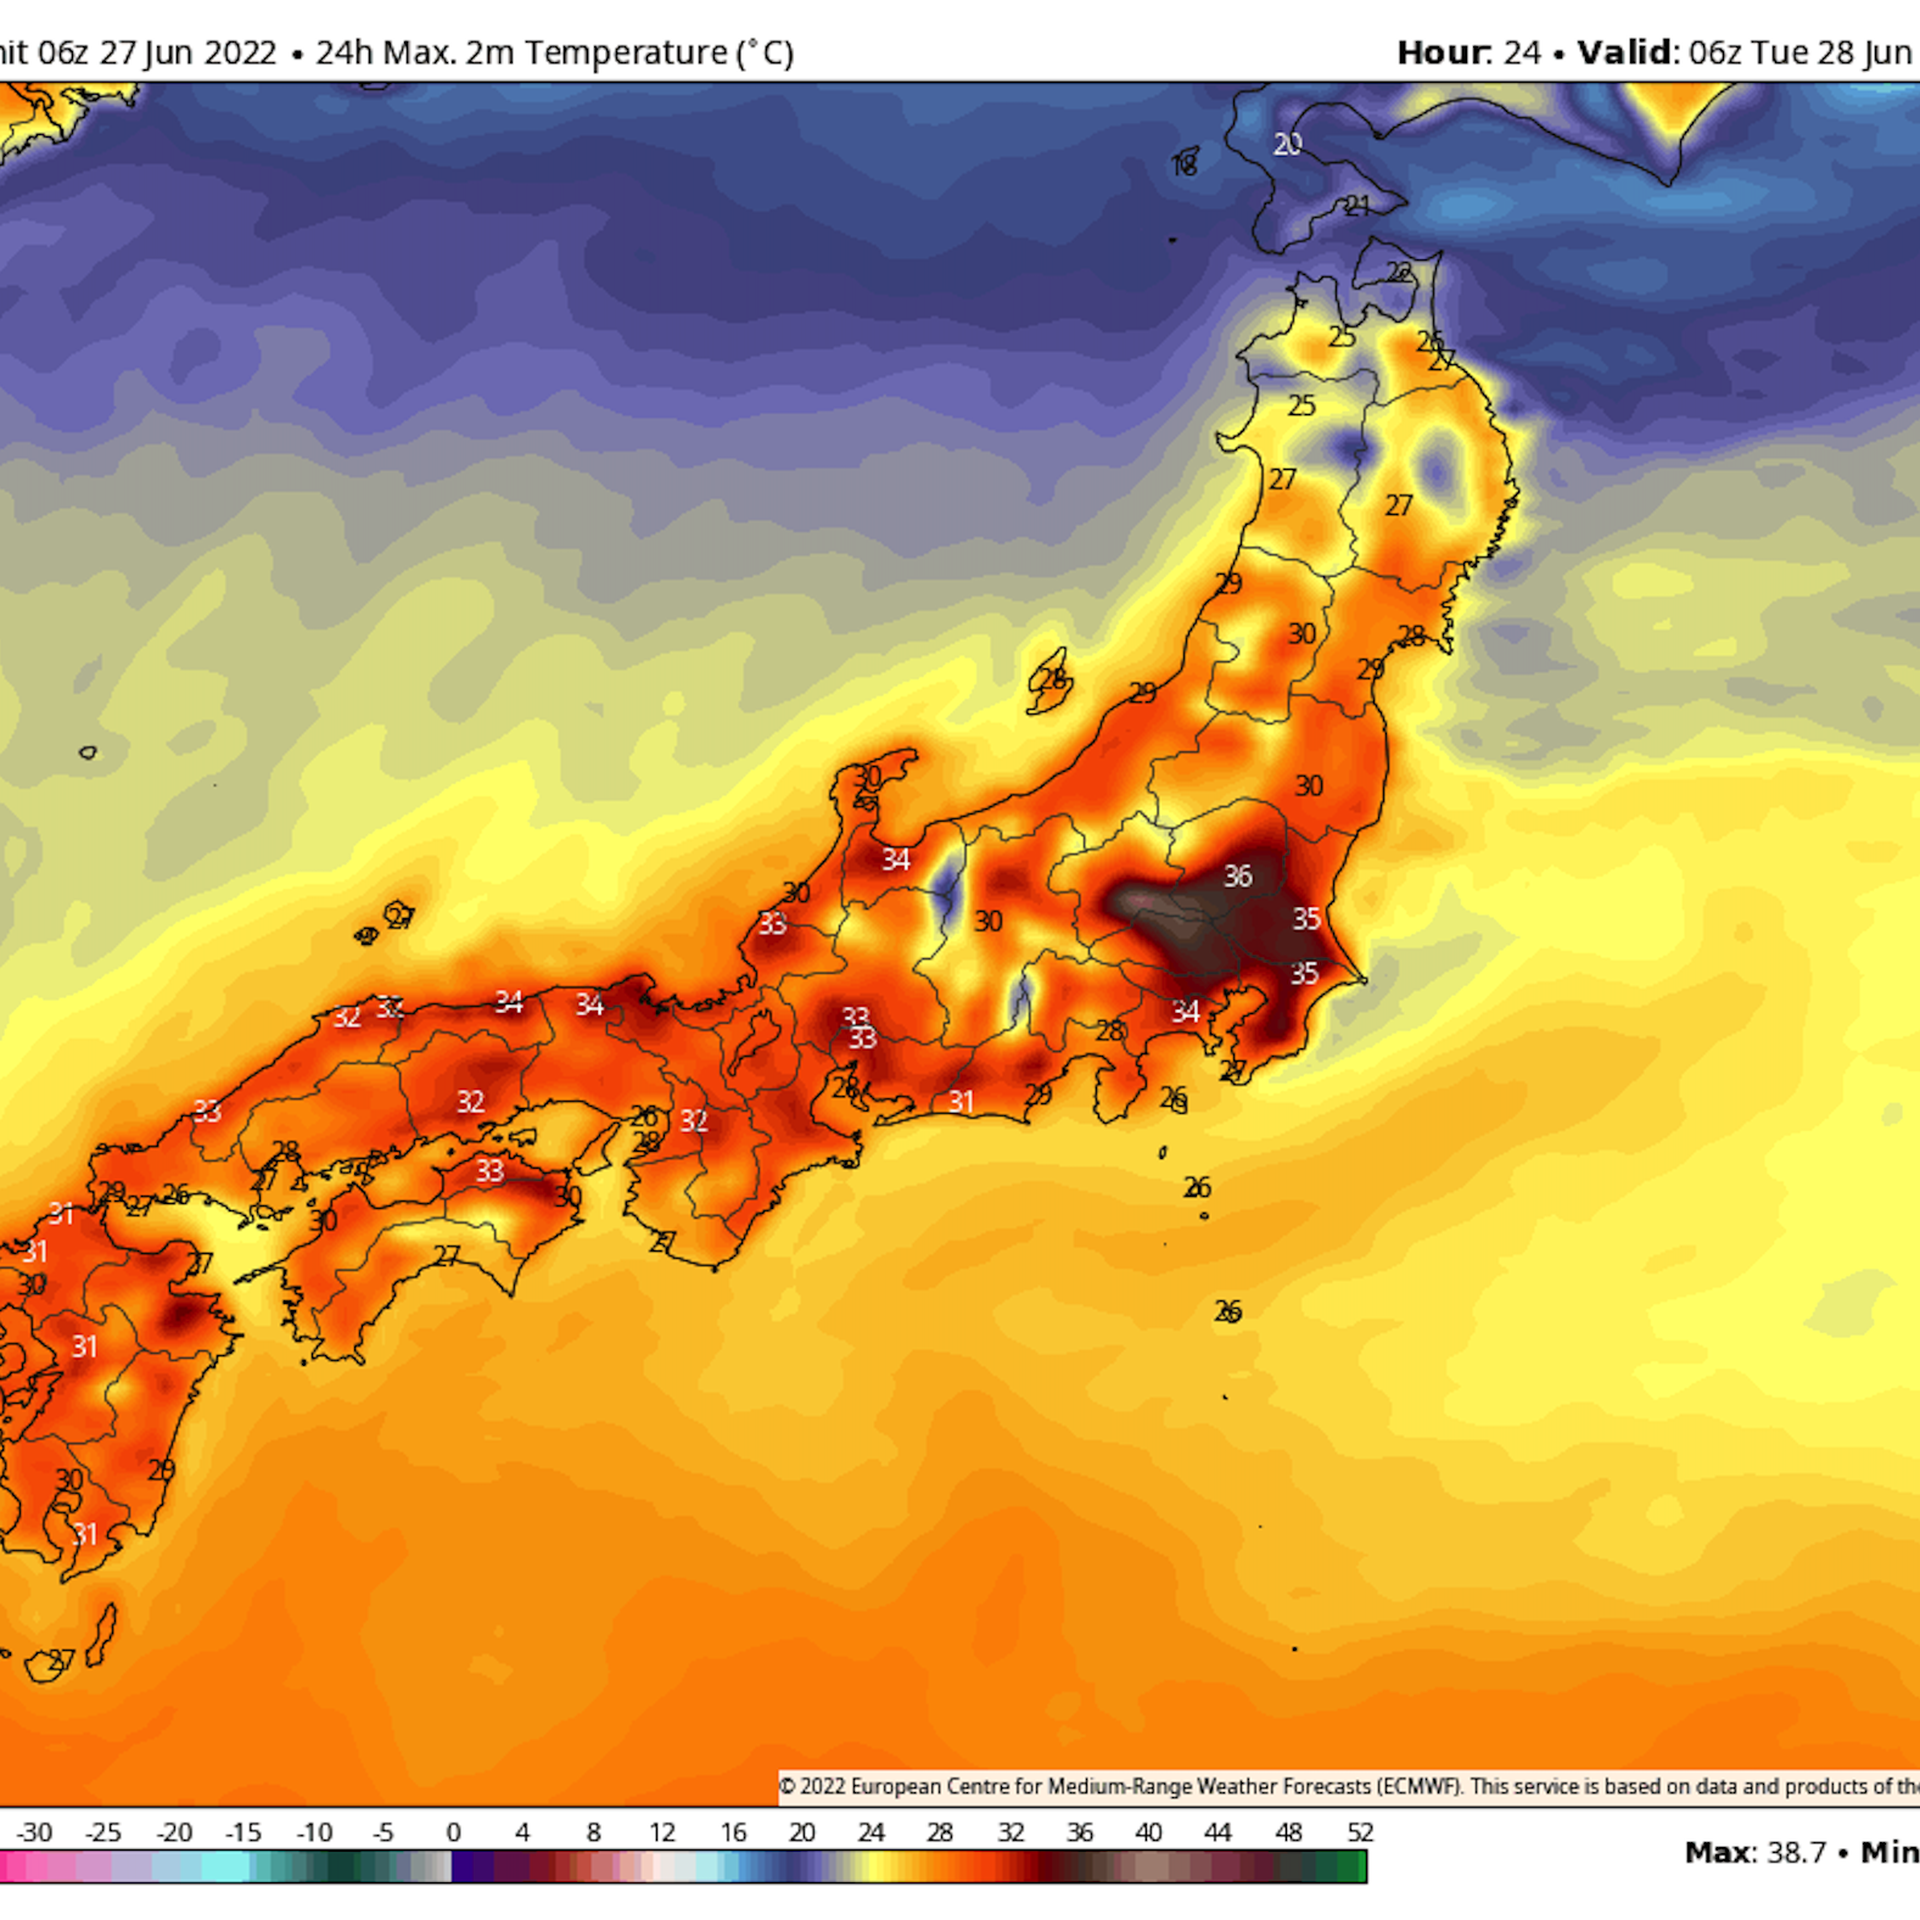 Computer model map of forecast highs in Japan on June 28, 2022.